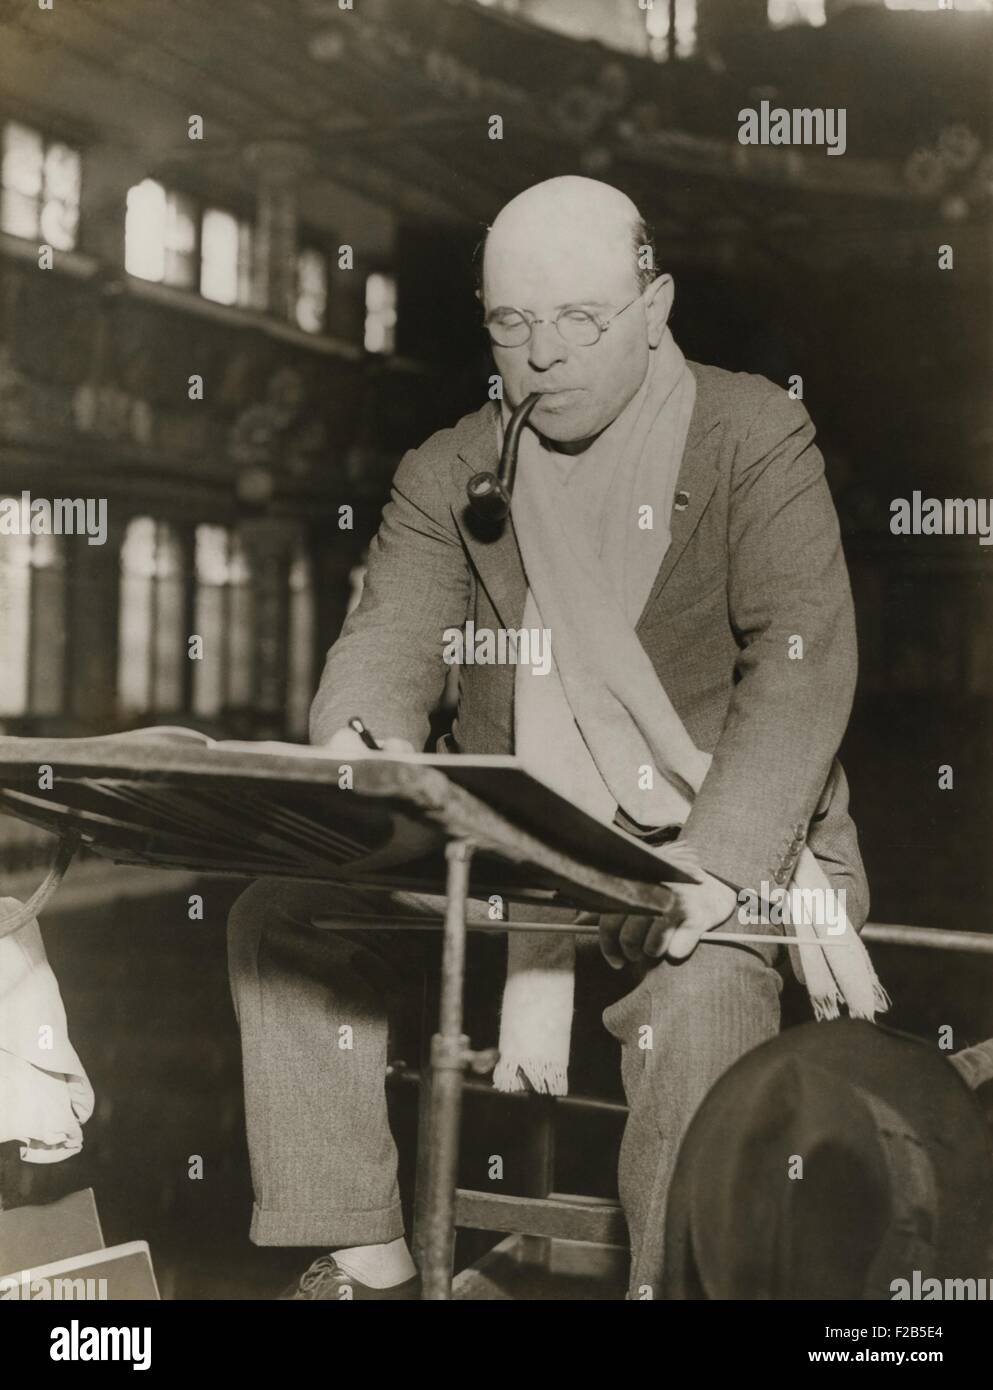 Pablo Casals at rehearsal conducting the Barcelona Philharmonic Orchestra. Casals generally appears at rehearsal in a scarf around his neck and a pipe between his lips. Ca. 1930-38. - (BSLOC 2014 17 200) Stock Photo